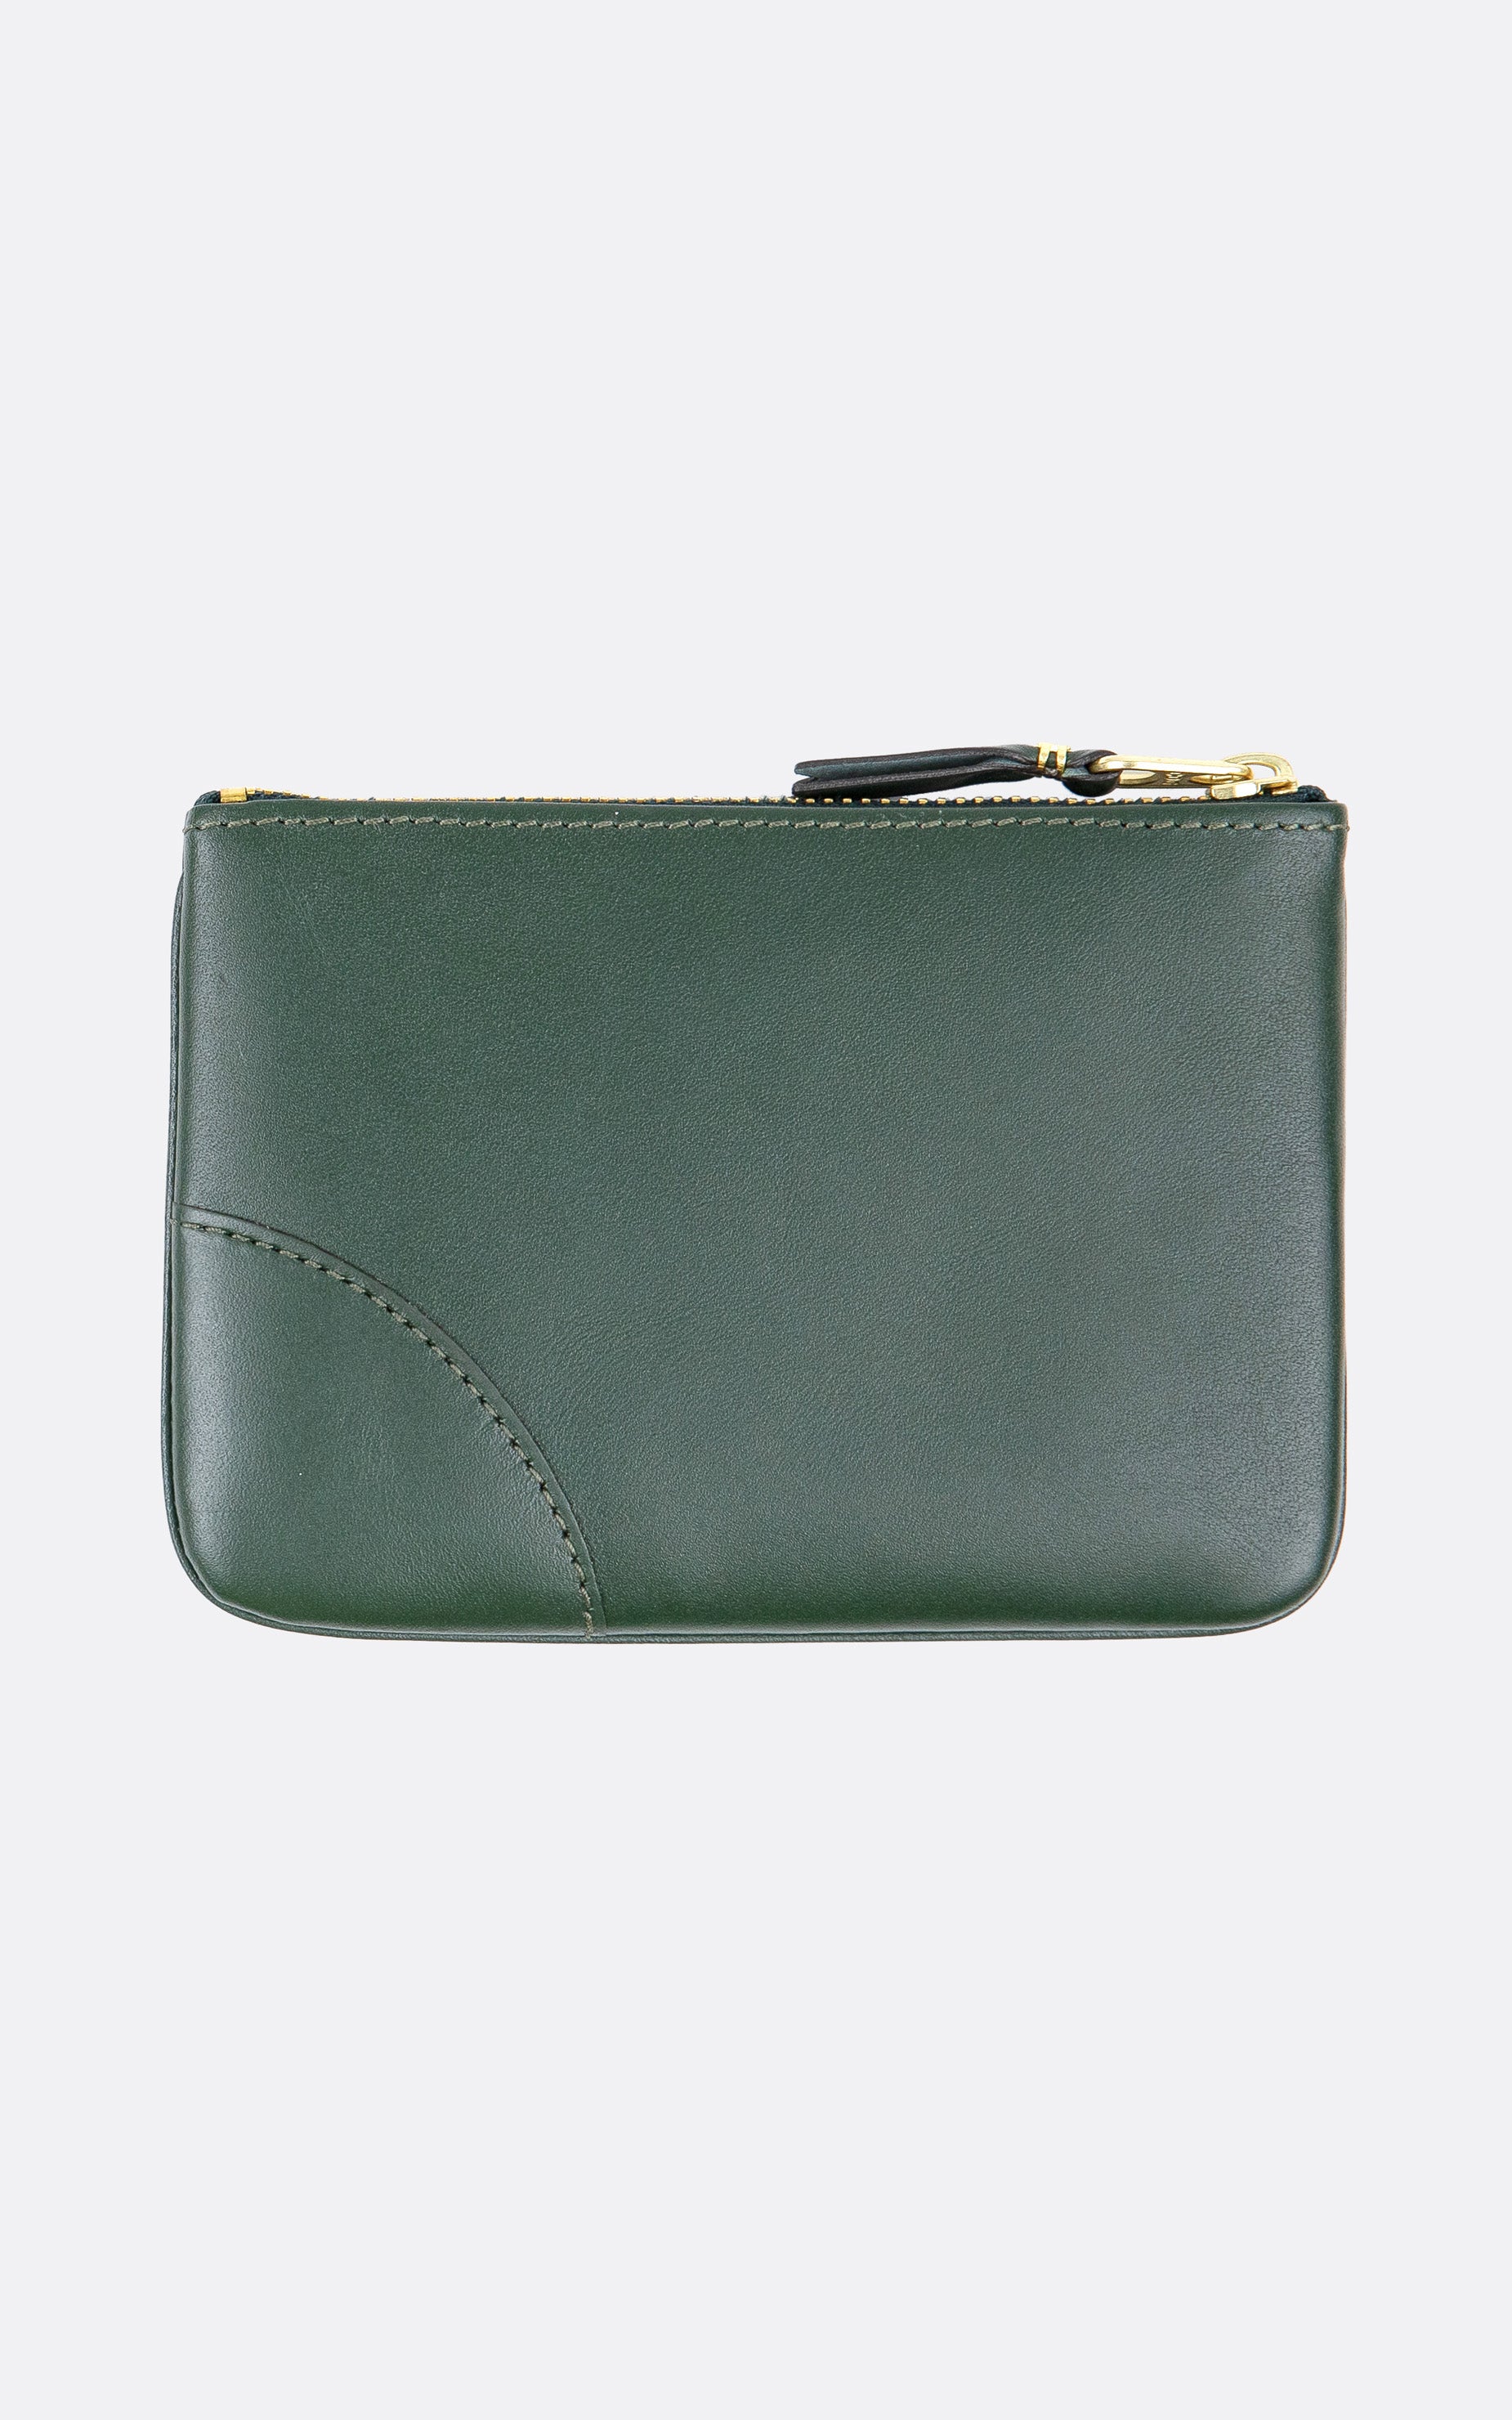 WALLET CLASSIC SMALL POUCH BOTTLE GREEN